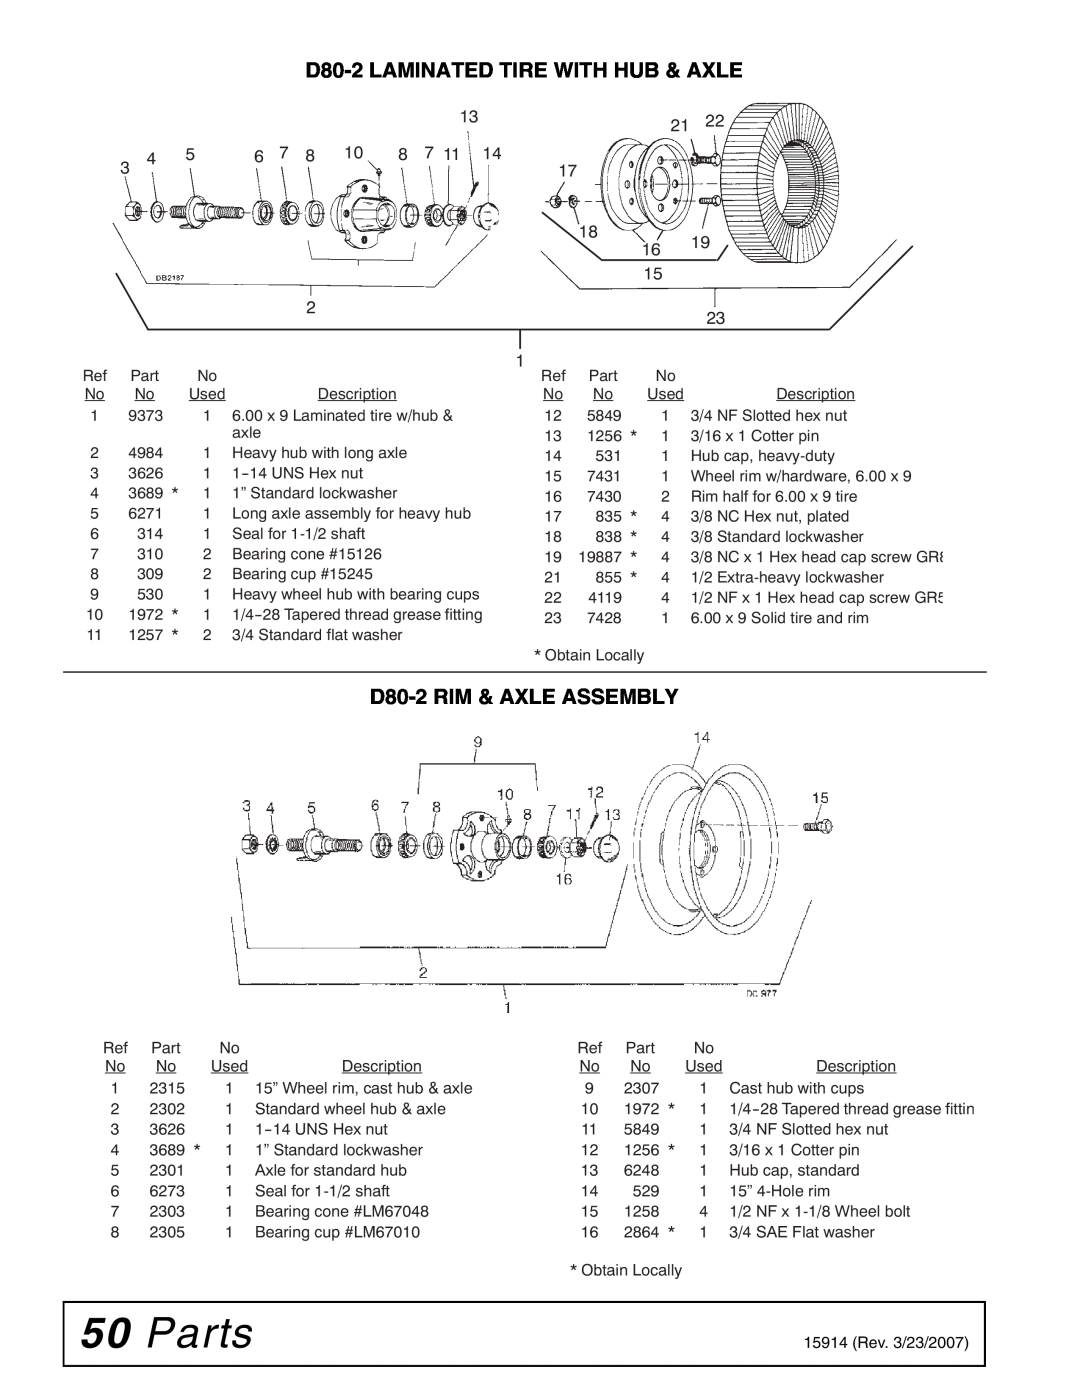 Woods Equipment MD80-2 manual Parts, D80-2LAMINATED TIRE WITH HUB & AXLE, D80-2RIM & AXLE ASSEMBLY 